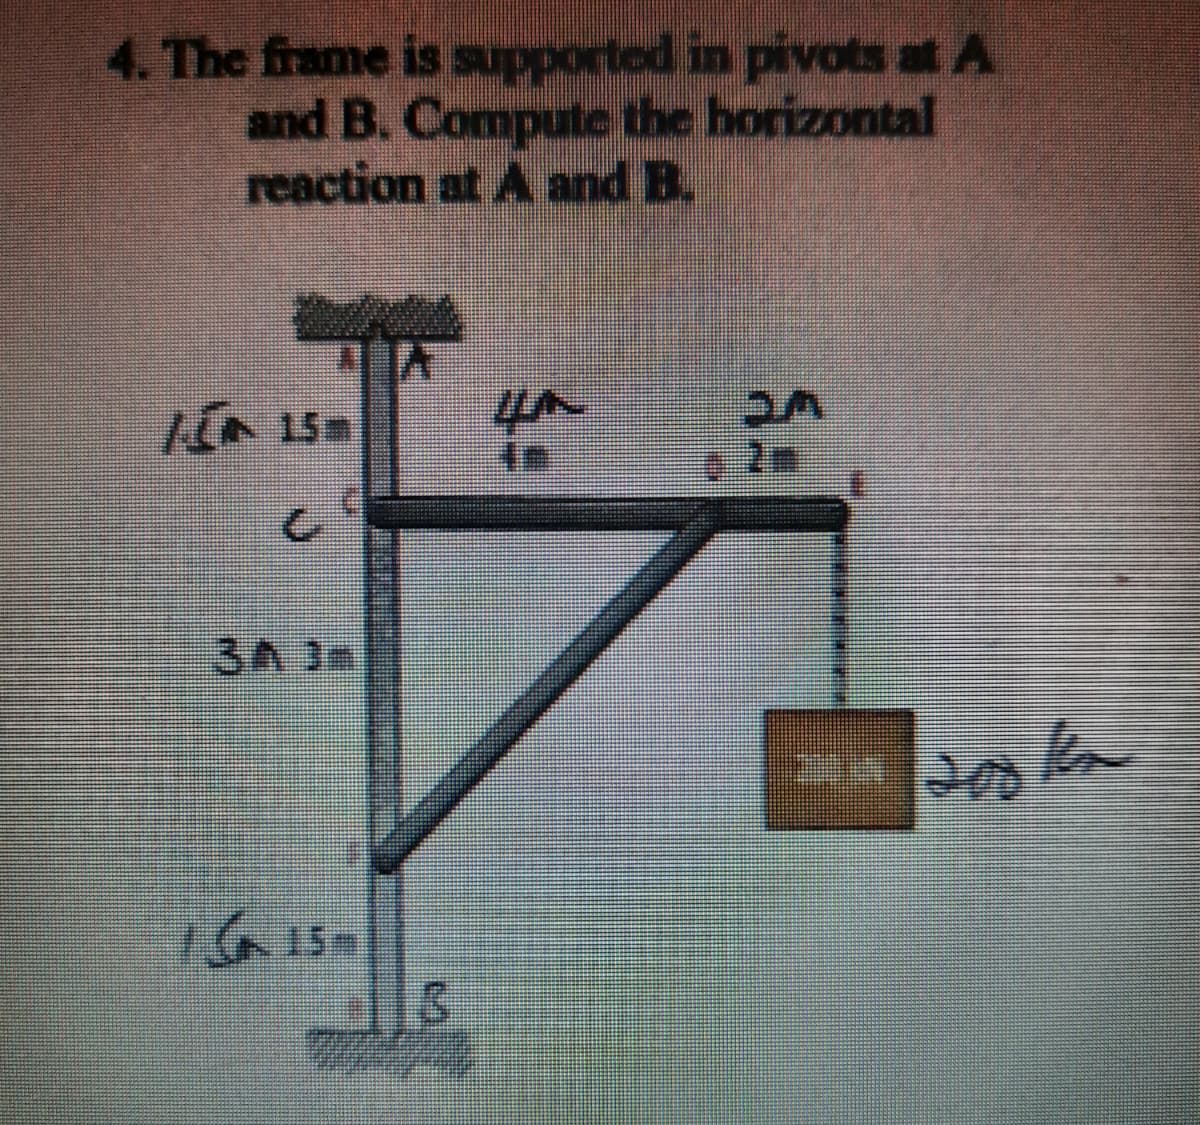 upported in pivots a A
4. The frame is s
and B. Compute the horizontal
reaction at A and B.
15m
o 2w
3A 3
1615-
